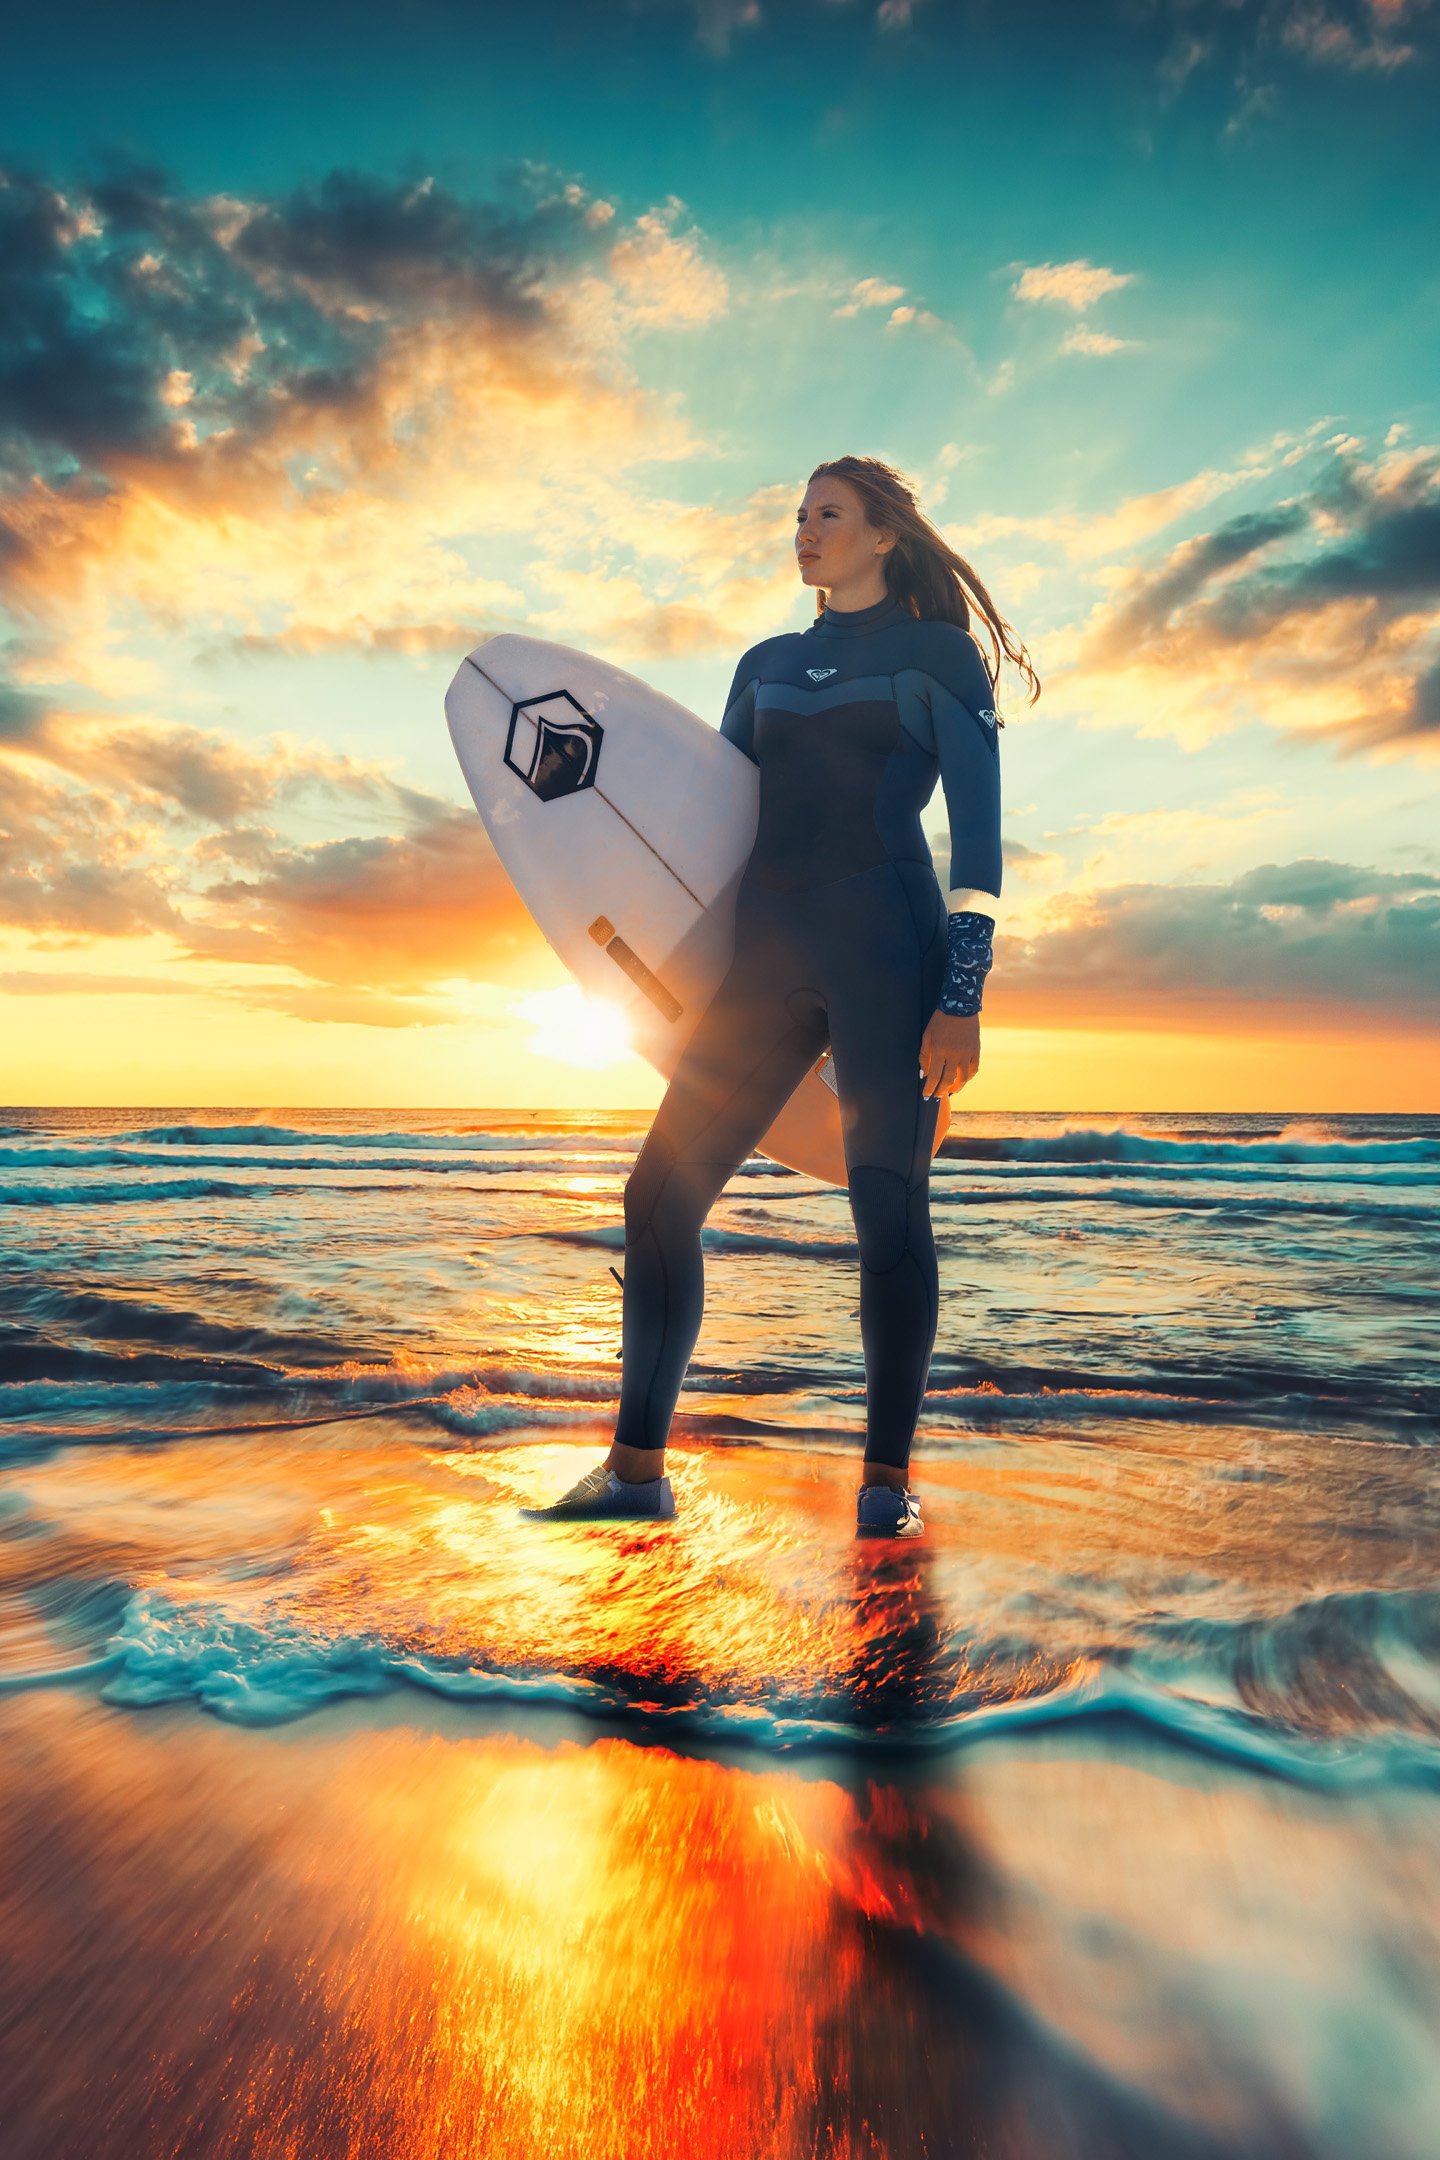 Surfer girl emerging from water on shore holding surfboard with blue skies and sun shining 